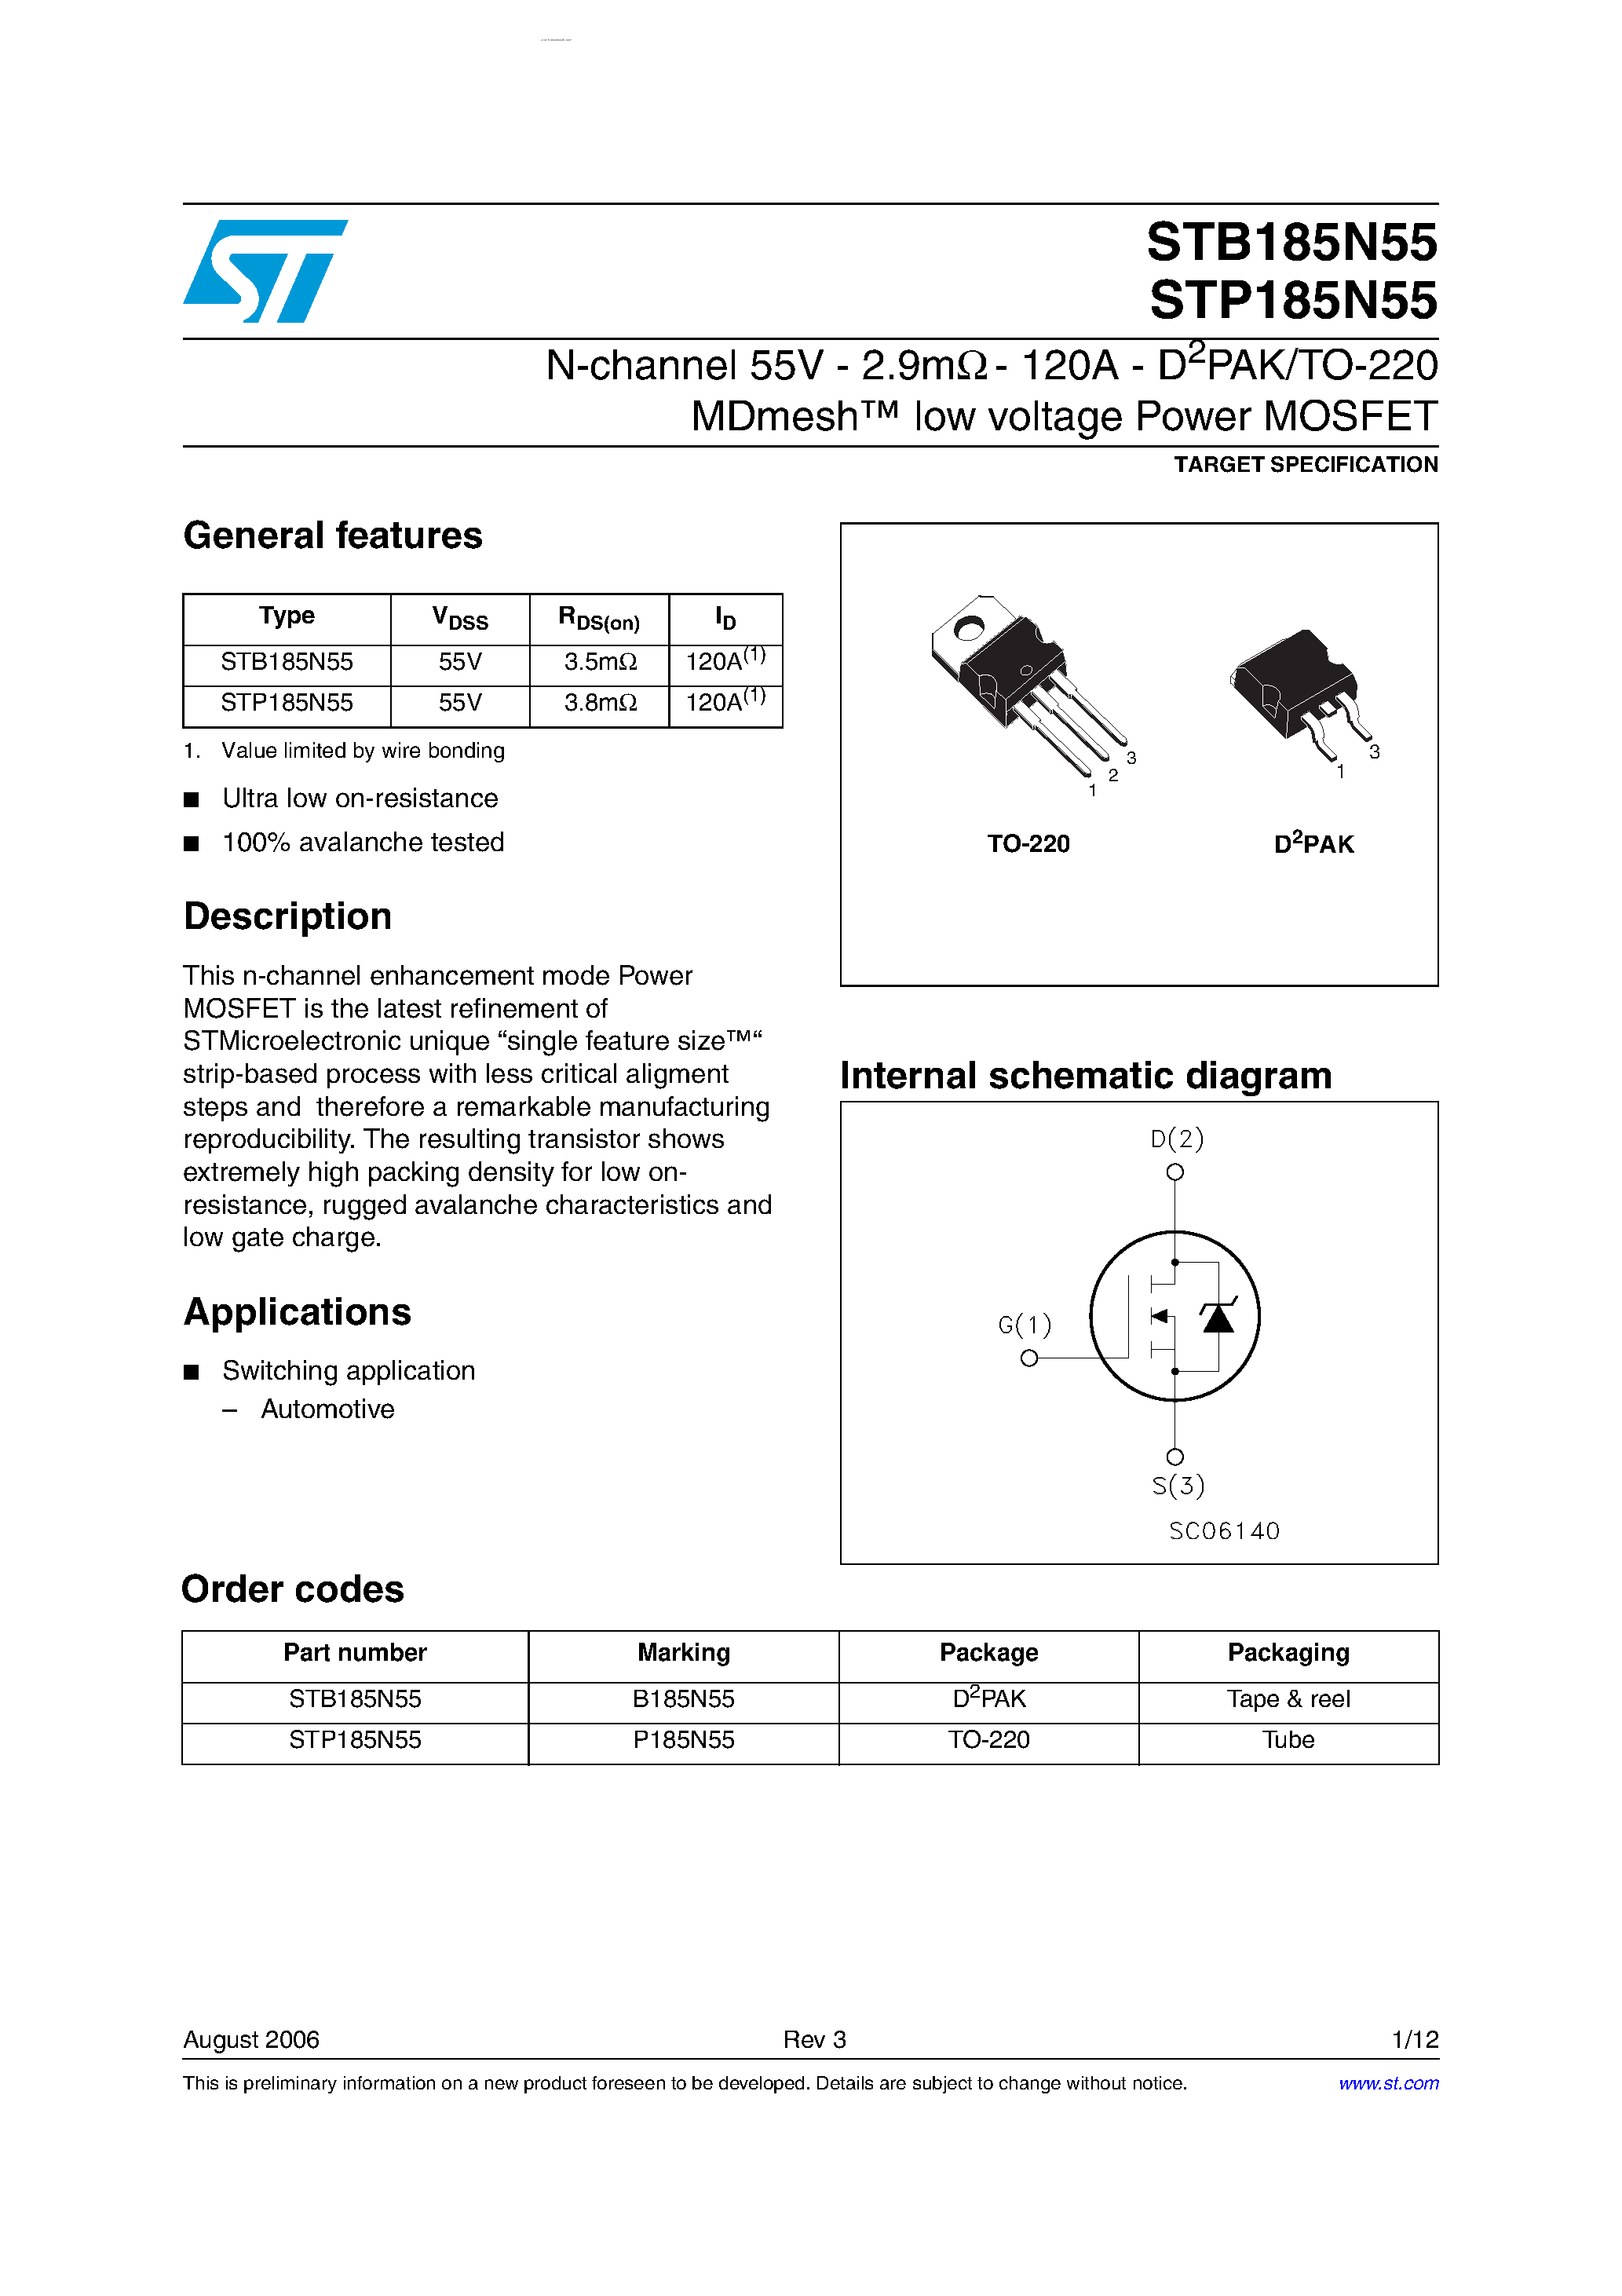 Datasheet STP185N55 - N-CHANNEL Power MOSFET page 1